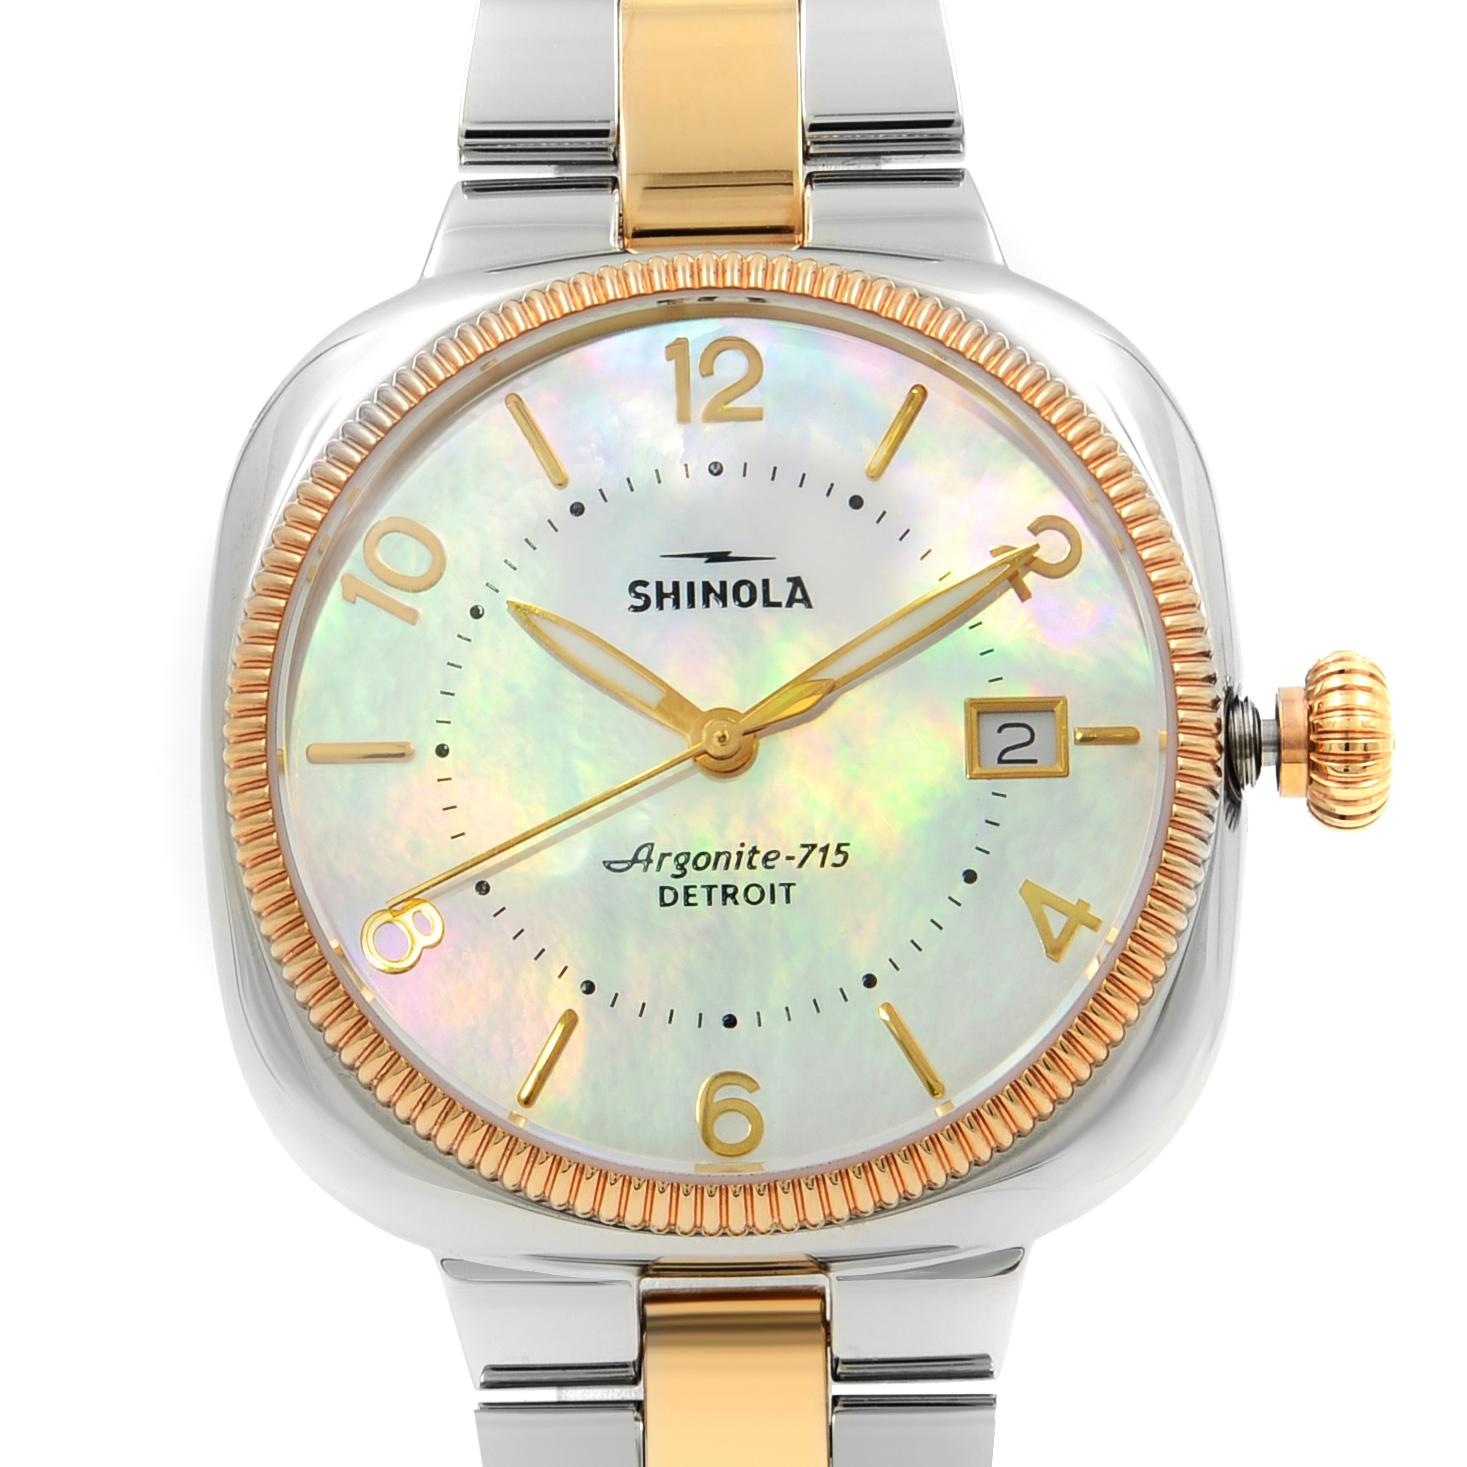 This brand new Shinola The Gomelsky S0120001102 is a beautiful Ladie's timepiece that is powered by quartz (battery) movement which is cased in a stainless steel case. It has a round shape face, date indicator dial and has hand sticks & numerals